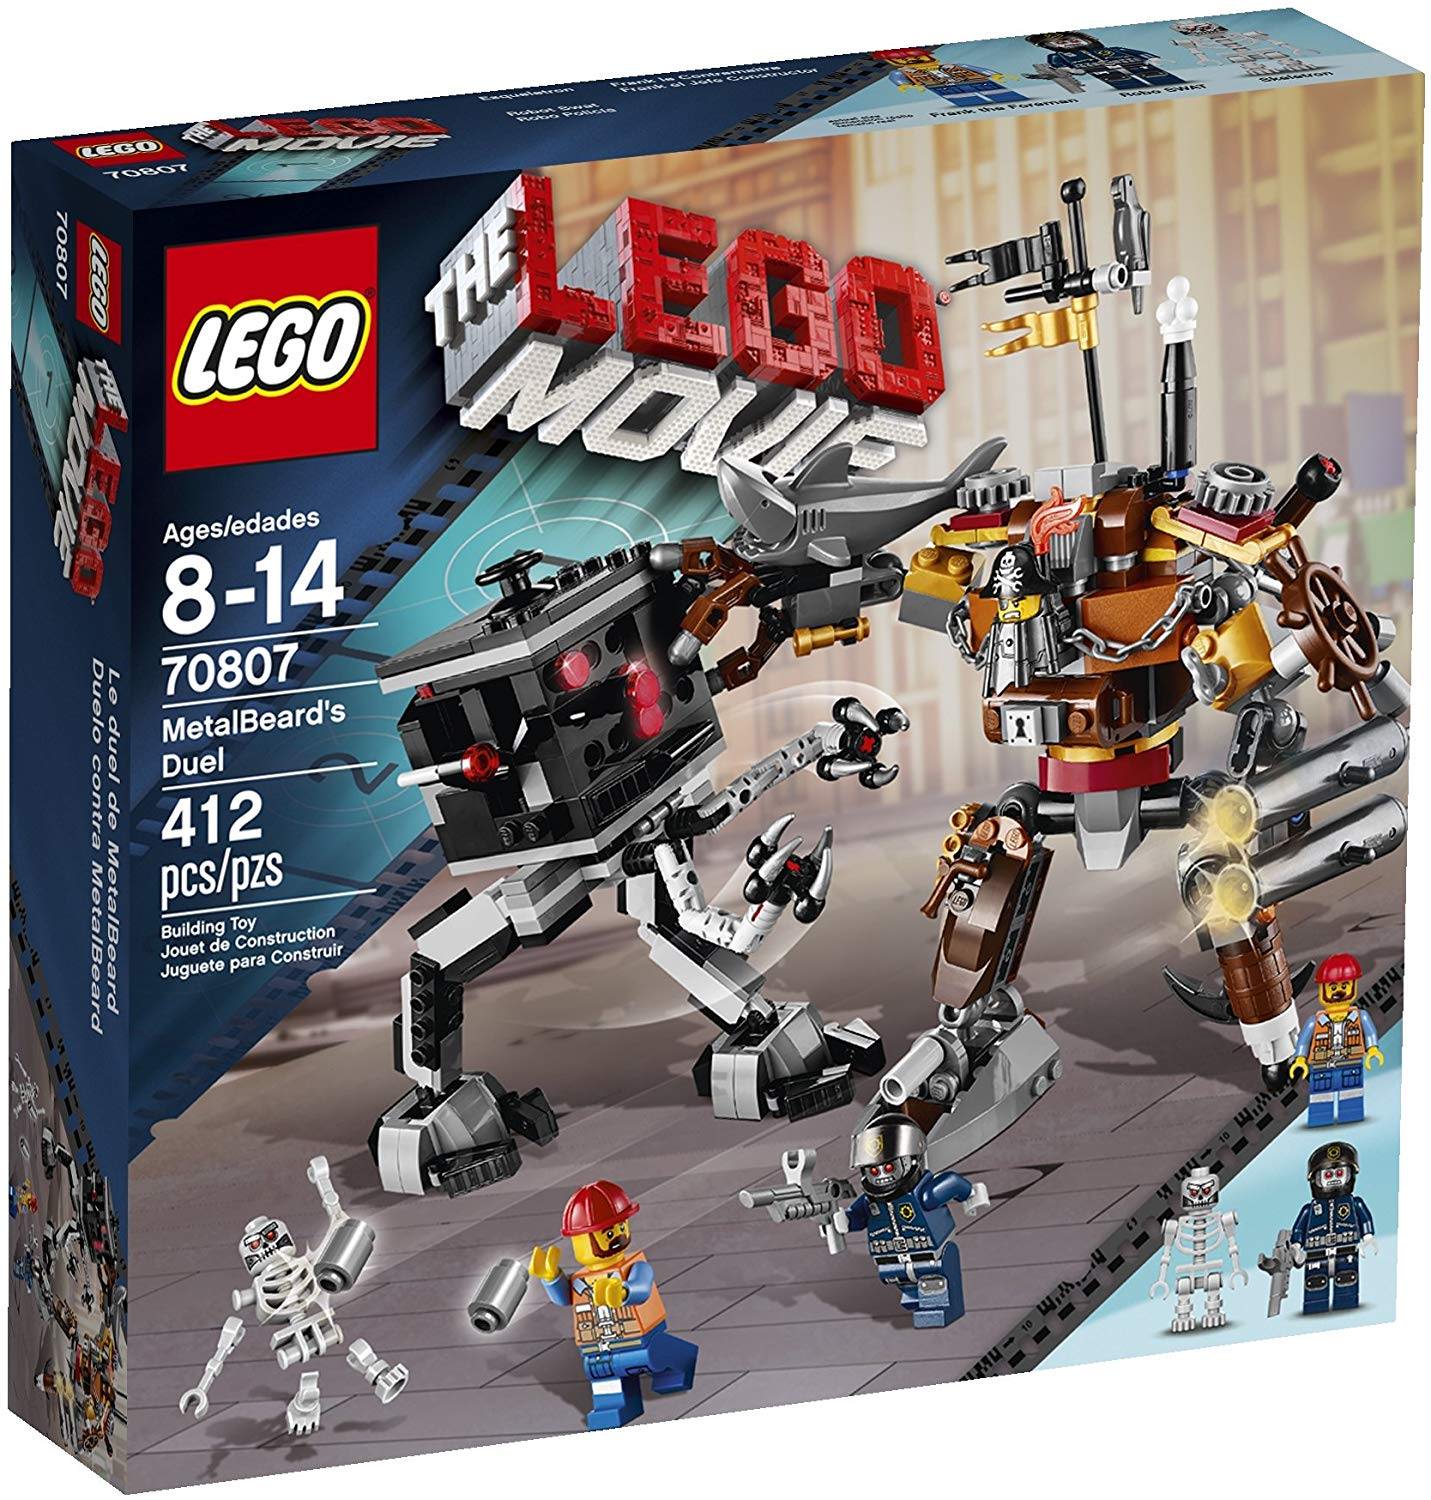 How You Can Resell LEGO SetsAll LEGO sets have a shelf life - by Juiced -  Medium